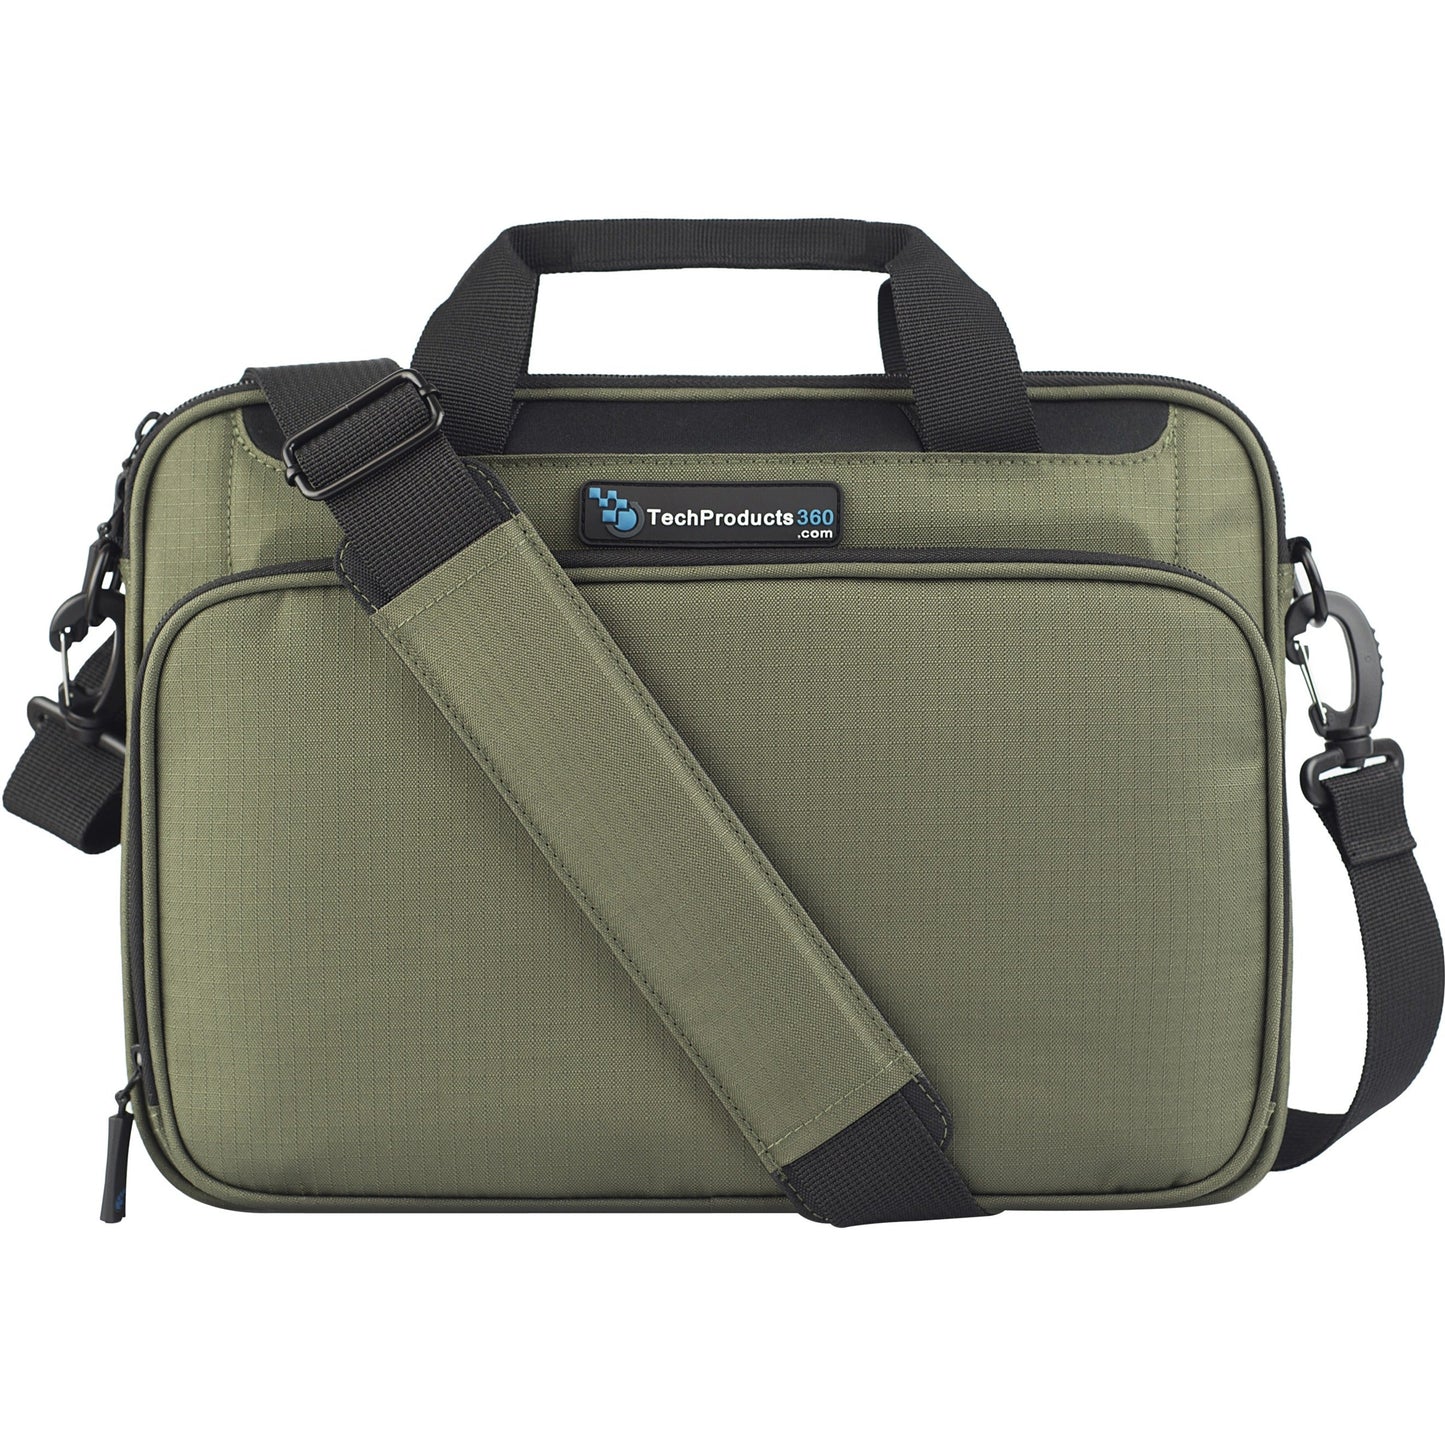 TechProducts360 Vault Carrying Case for 12" Notebook - Green